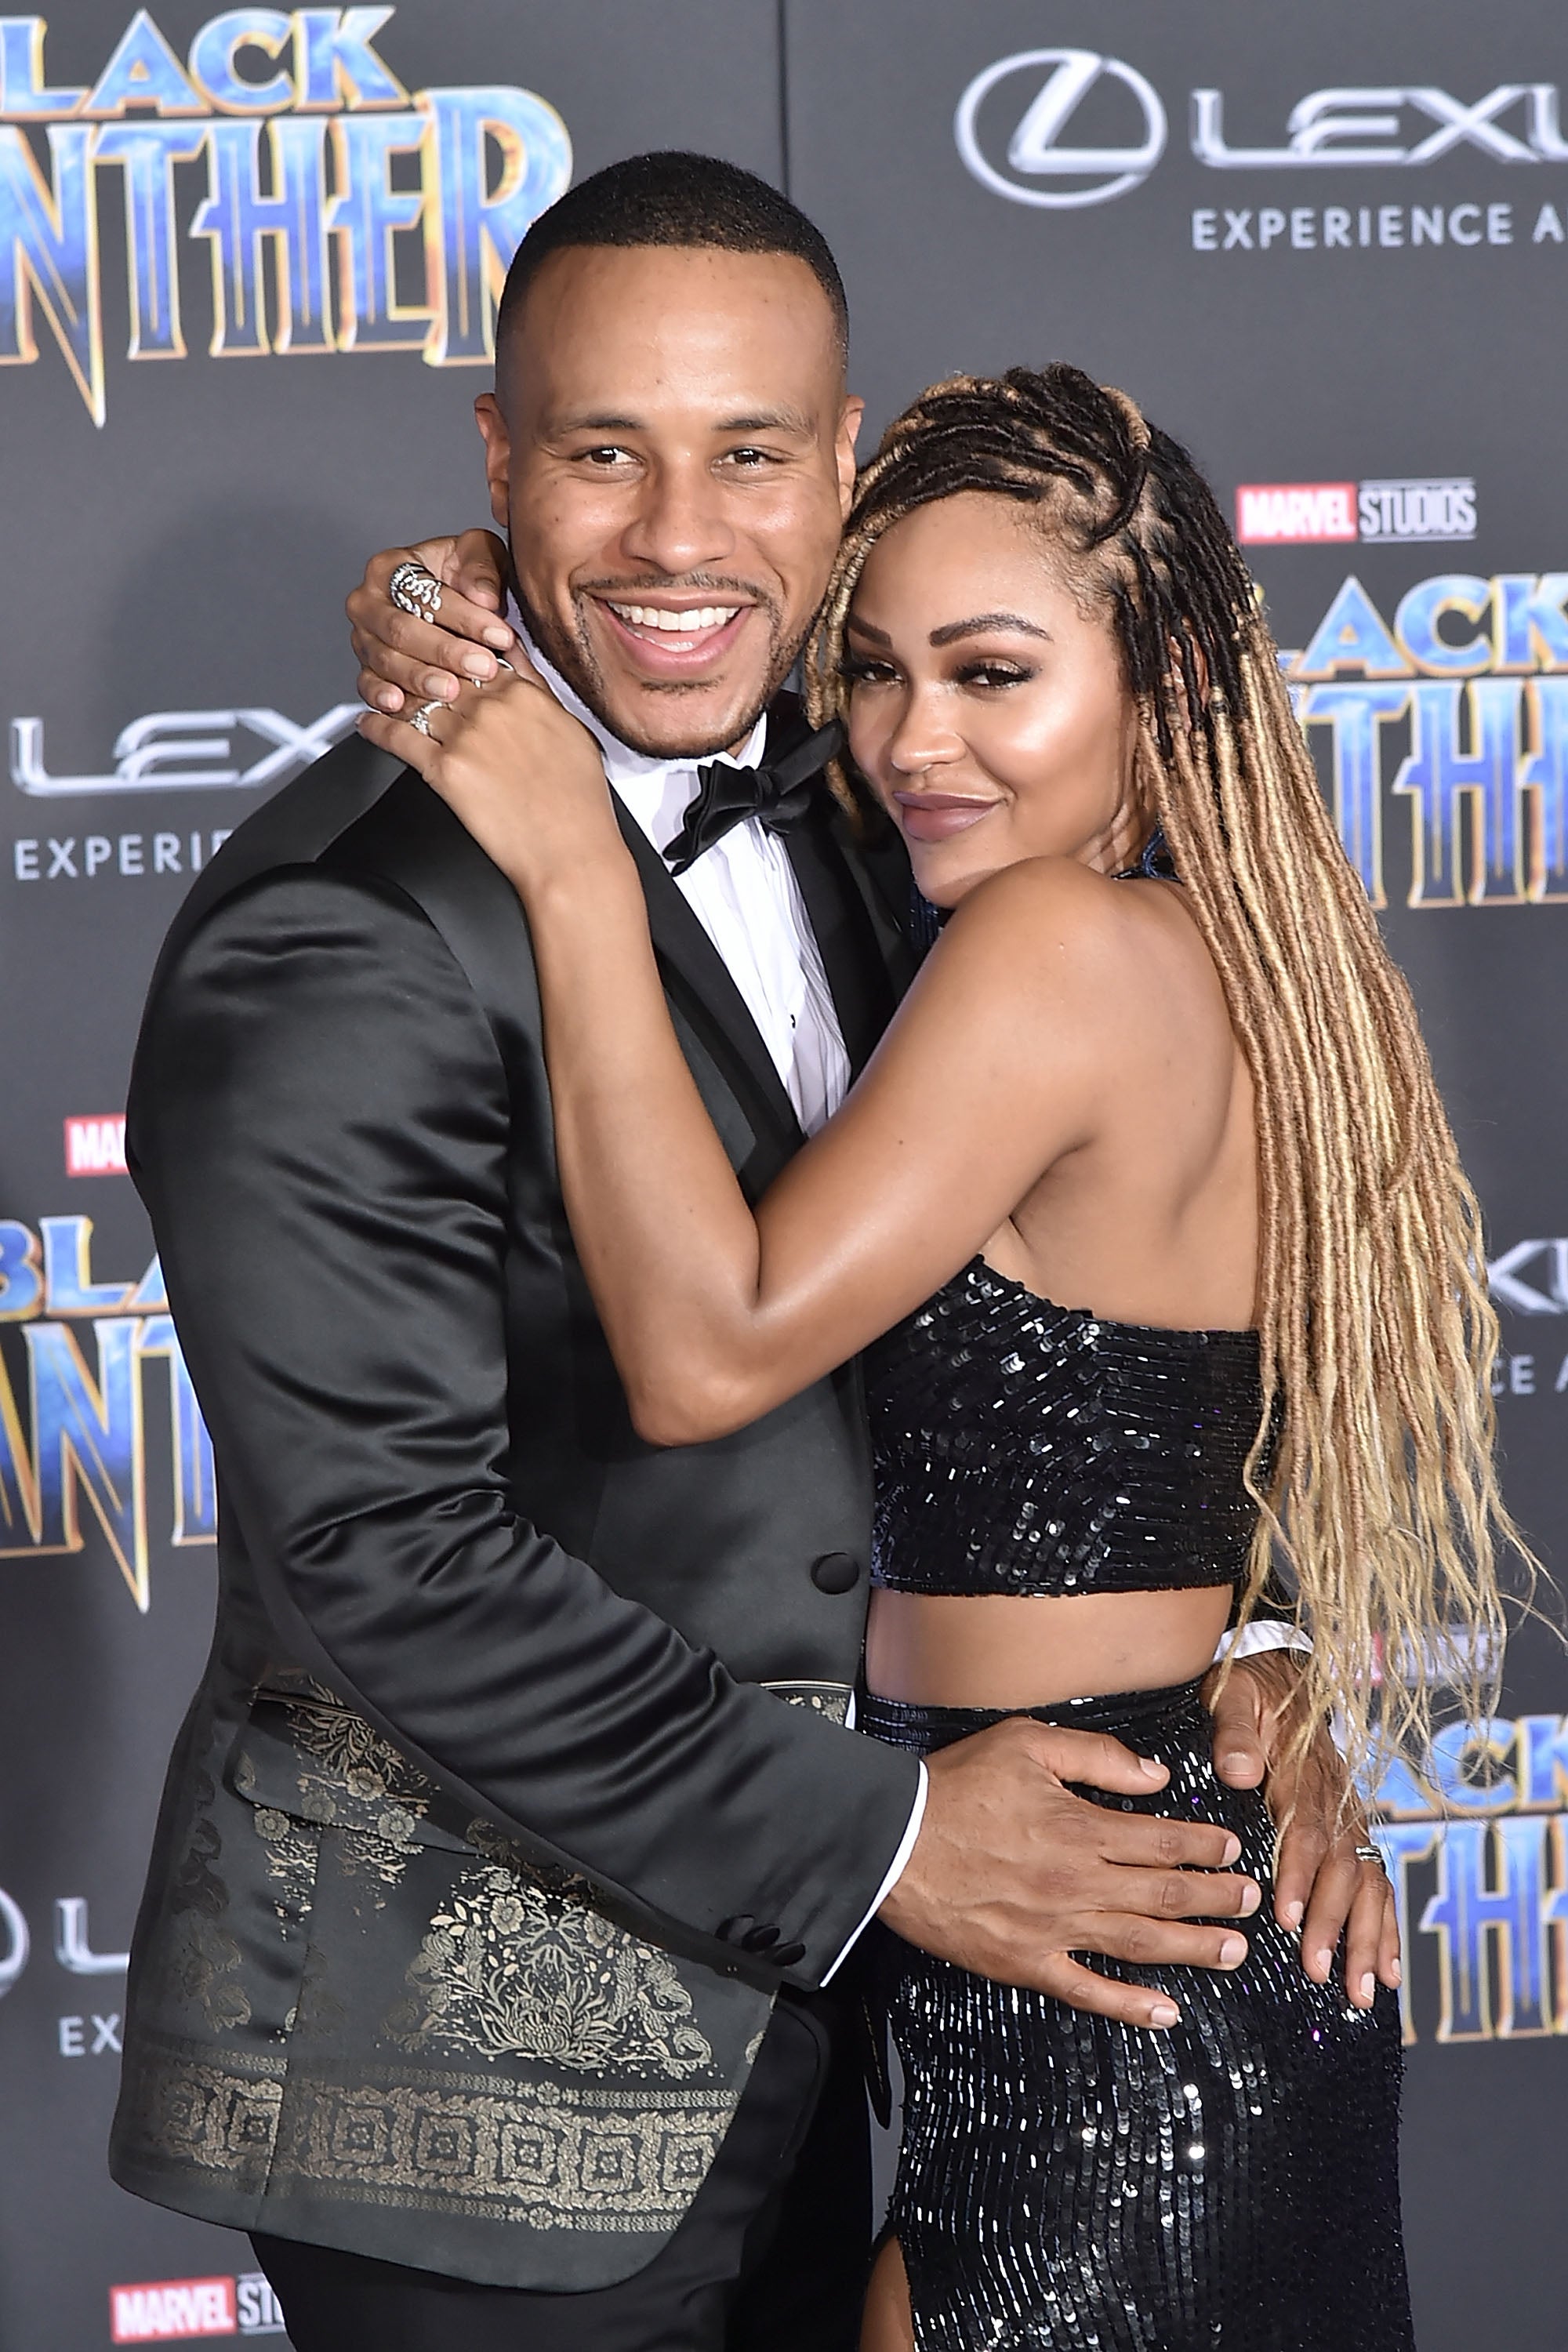 These Couples Had An Epic Date Night At The 'Black Panther' Premiere
